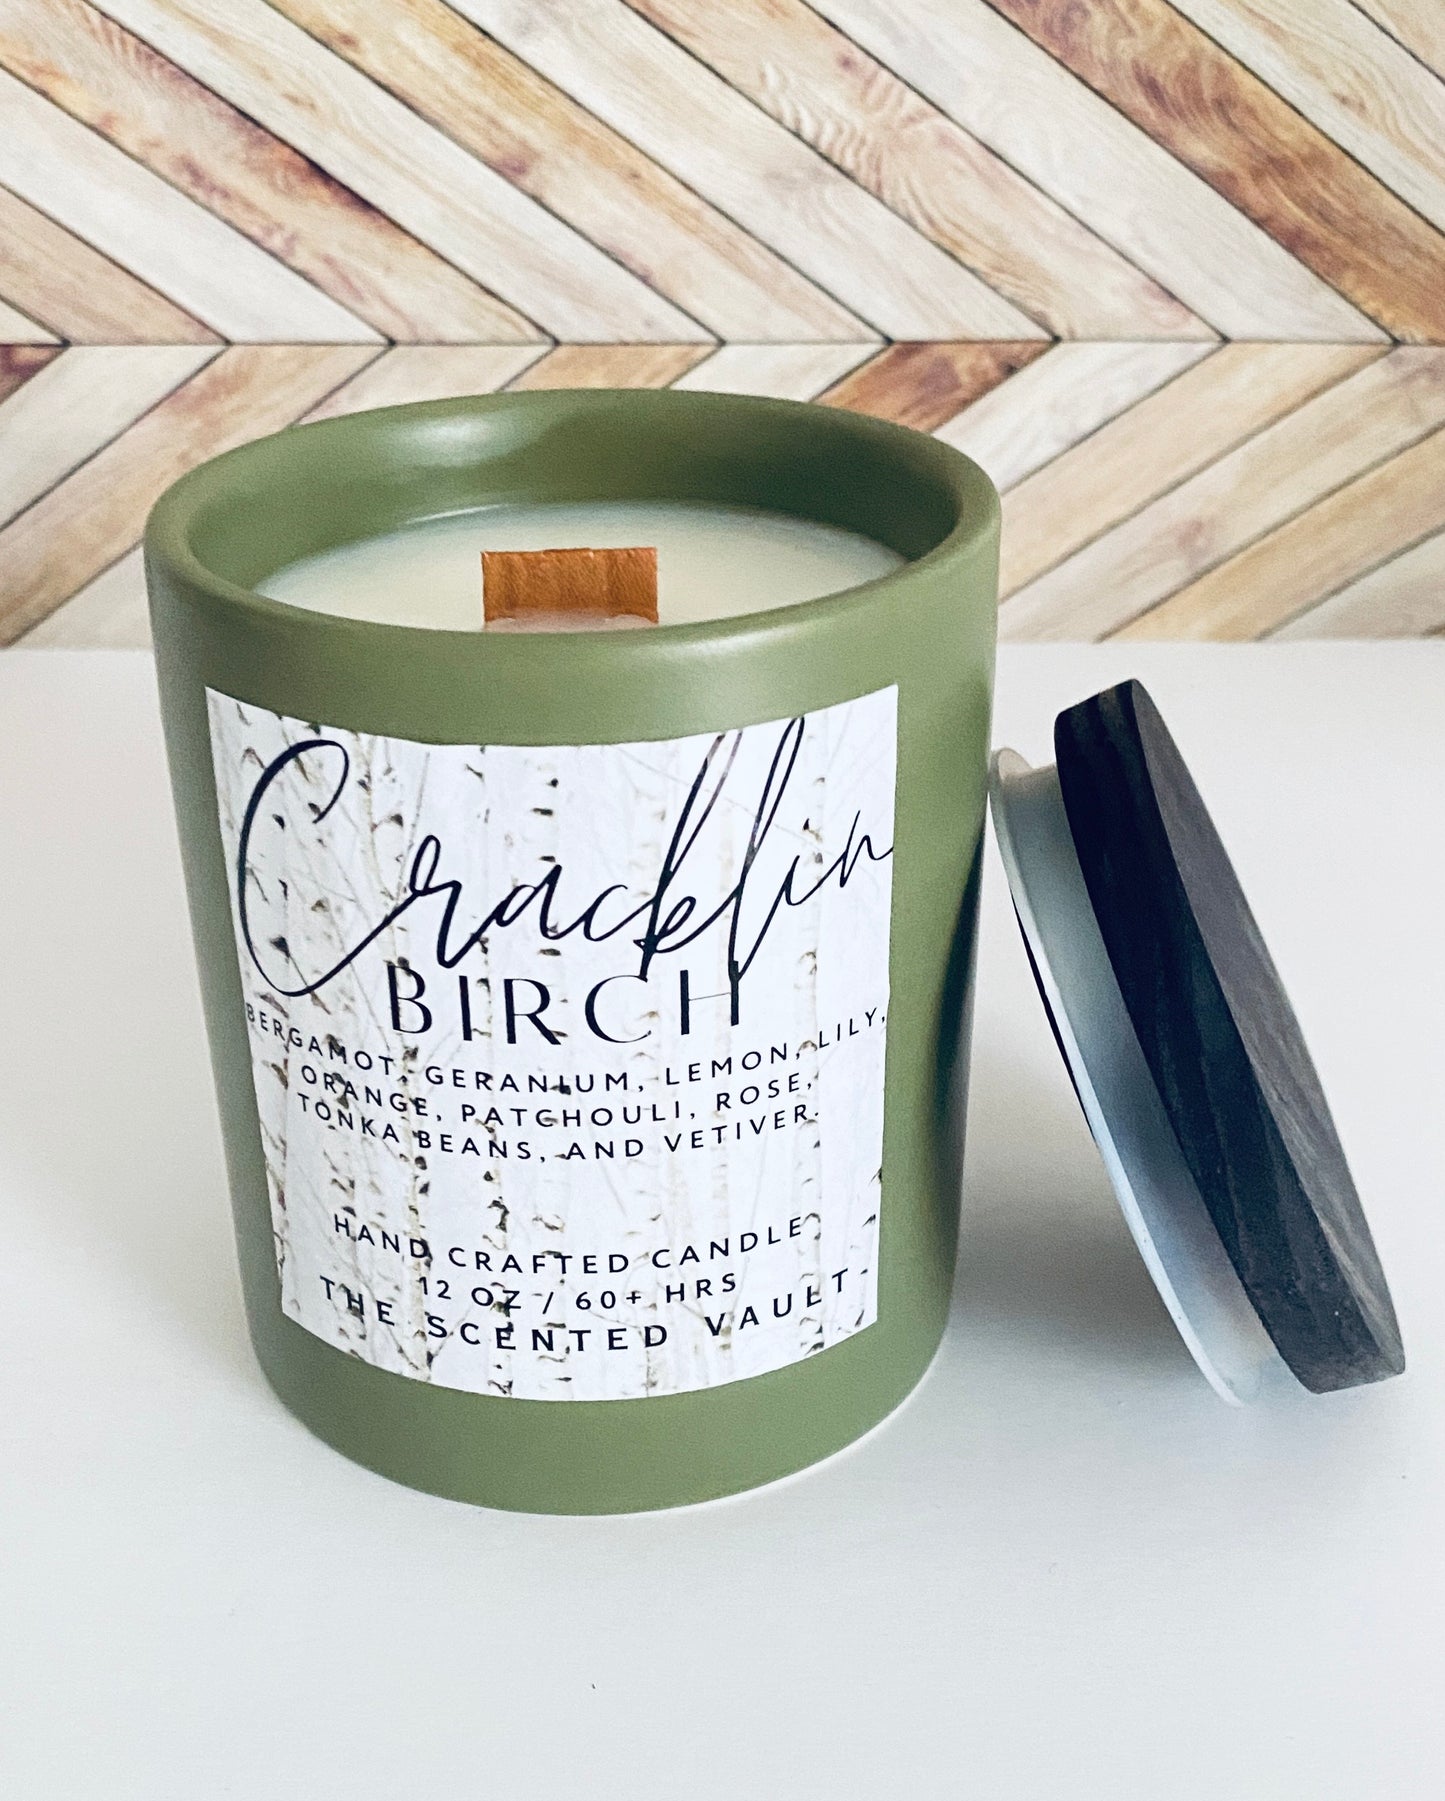 Cracklin Birch Scented Candle